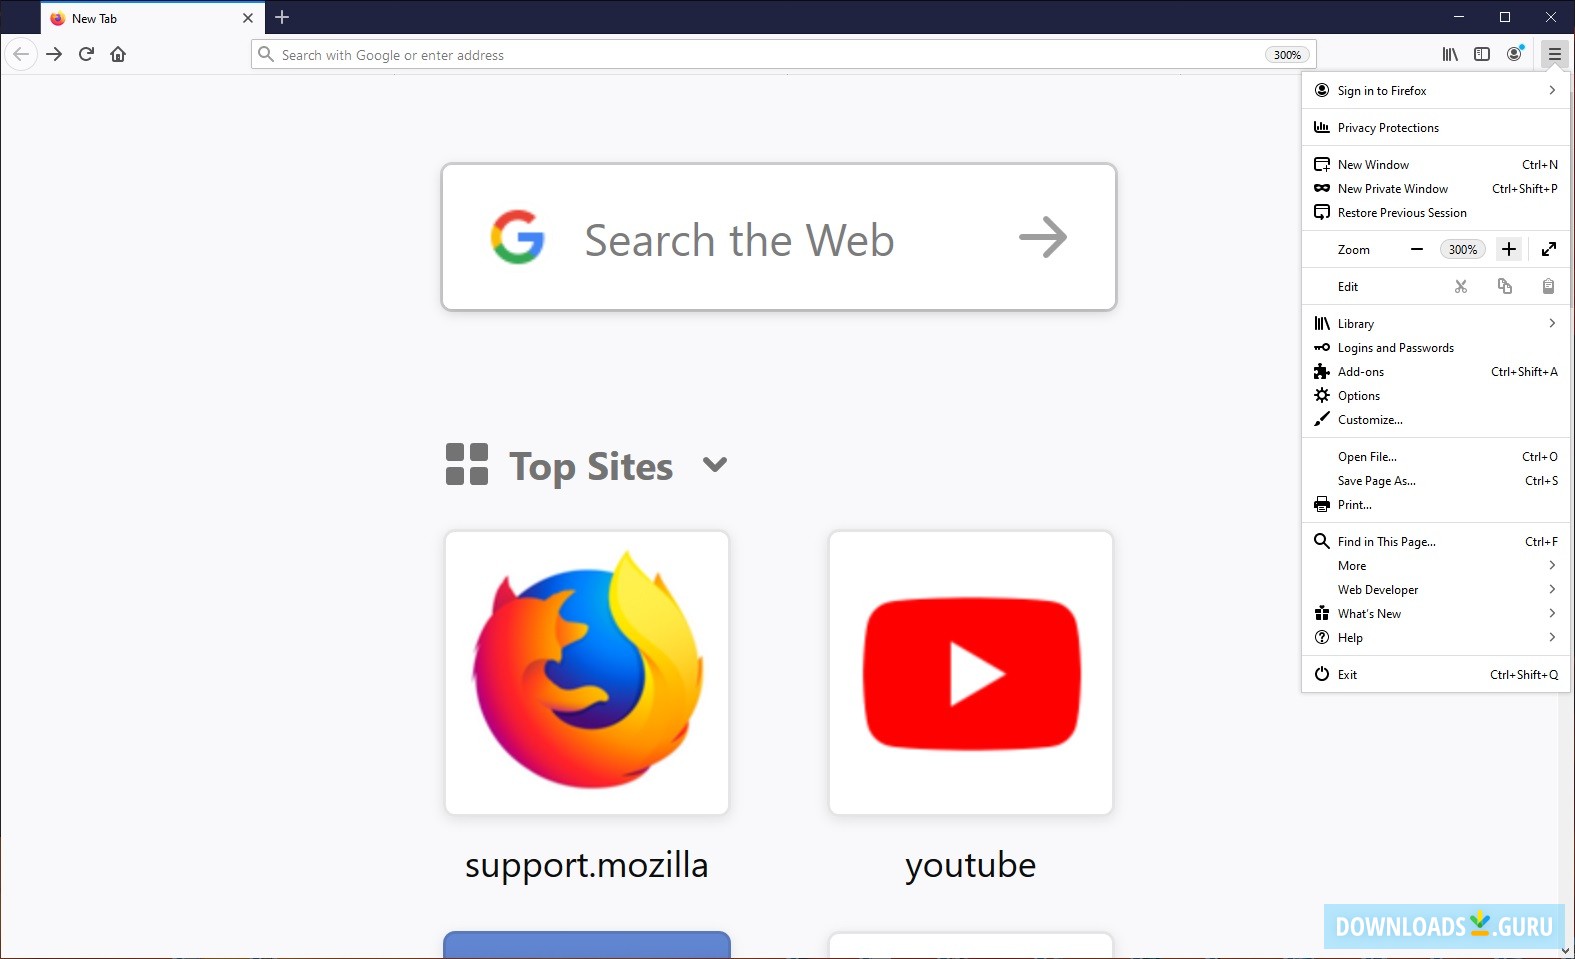 firefox download for windows